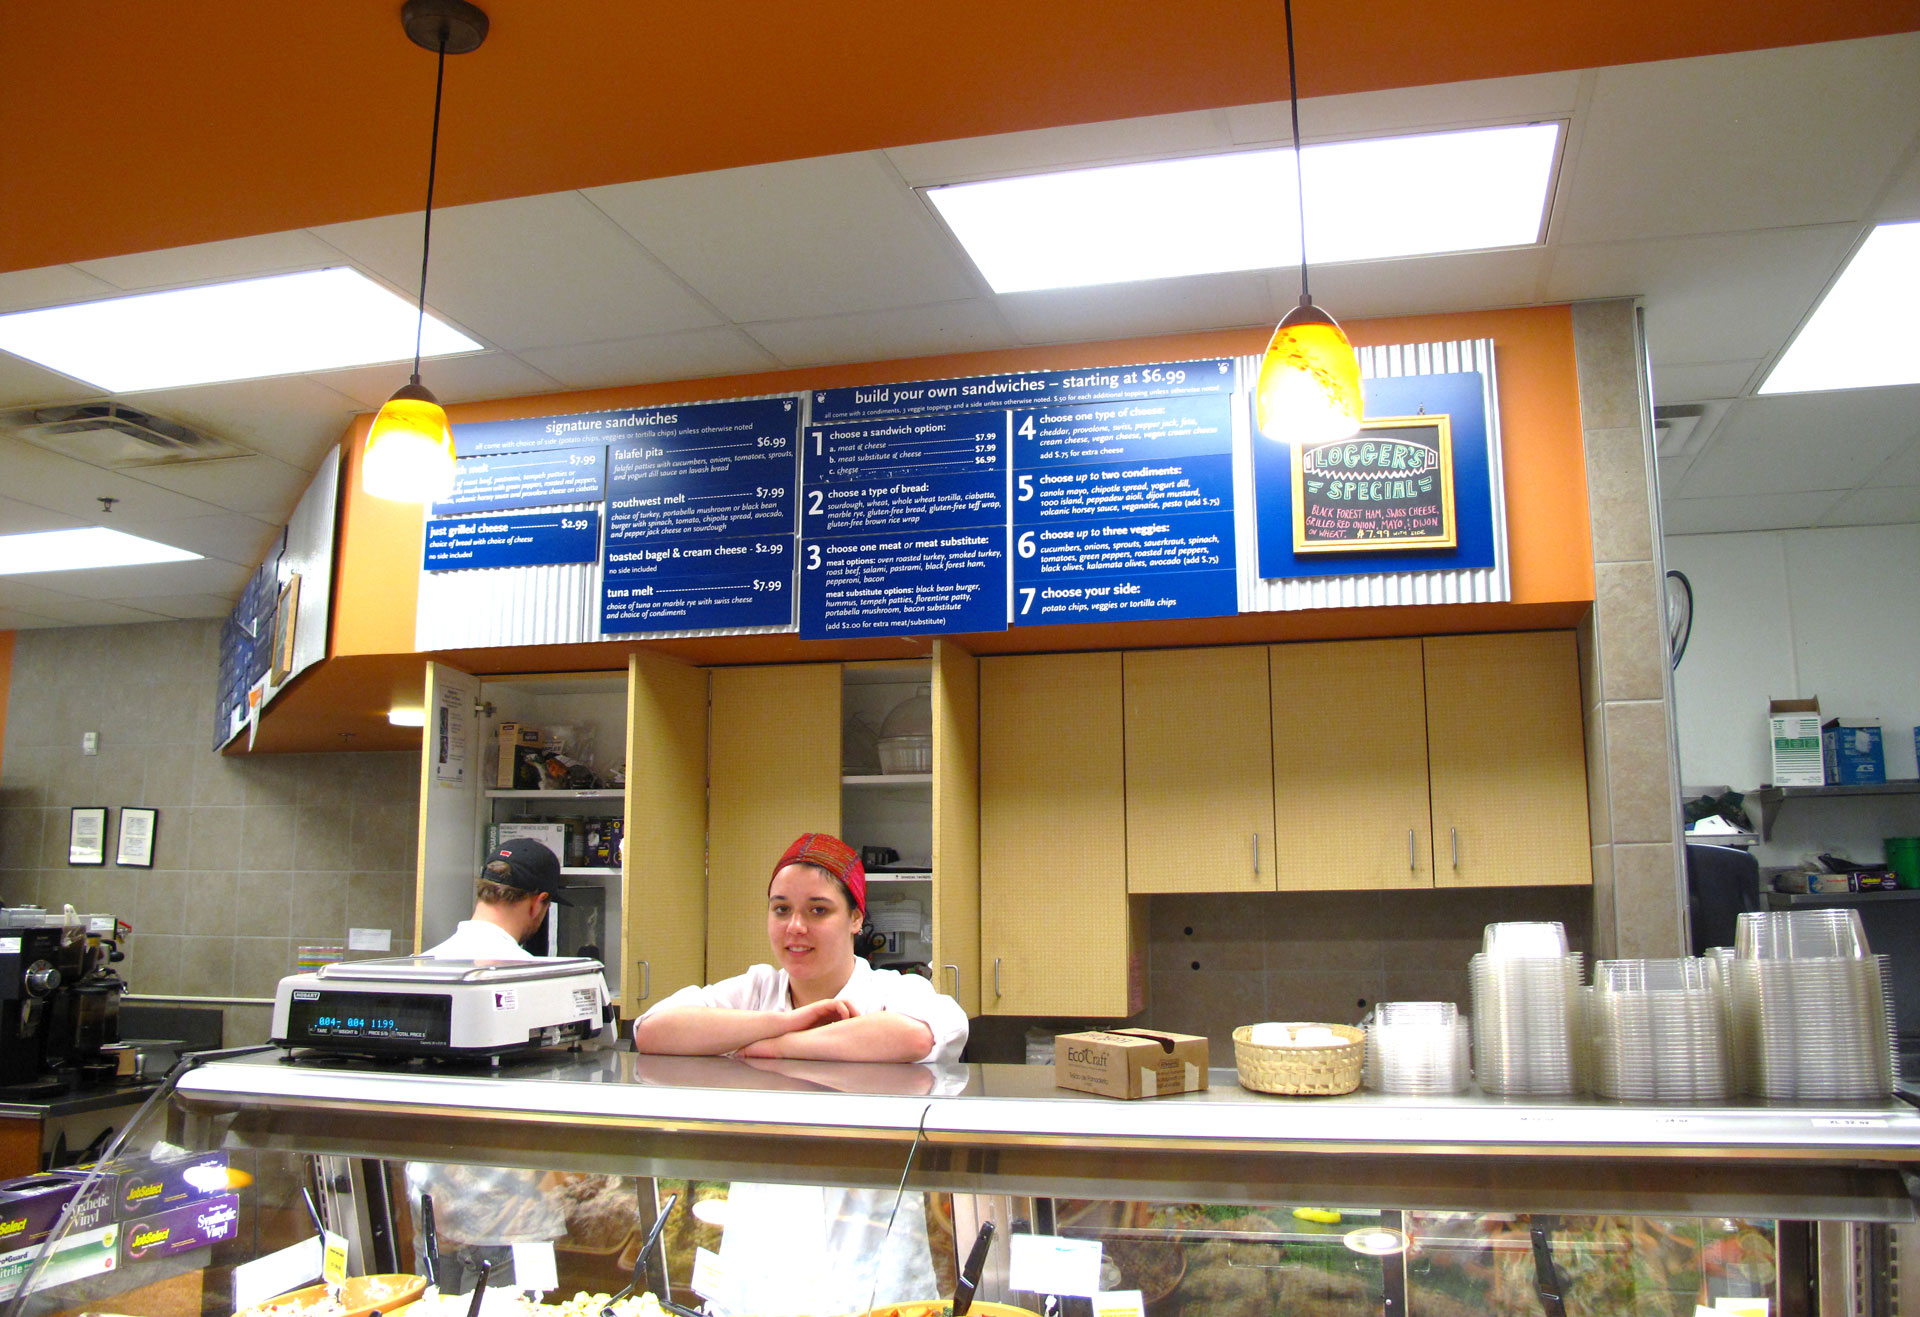 A person wearing a red cap and white uniform stands behind a counter in a sandwich shop at Whole Foods Coop Duluth MN. The shop has a menu displayed on the wall behind them and various food items on the counter. Another person is visible working in the background.